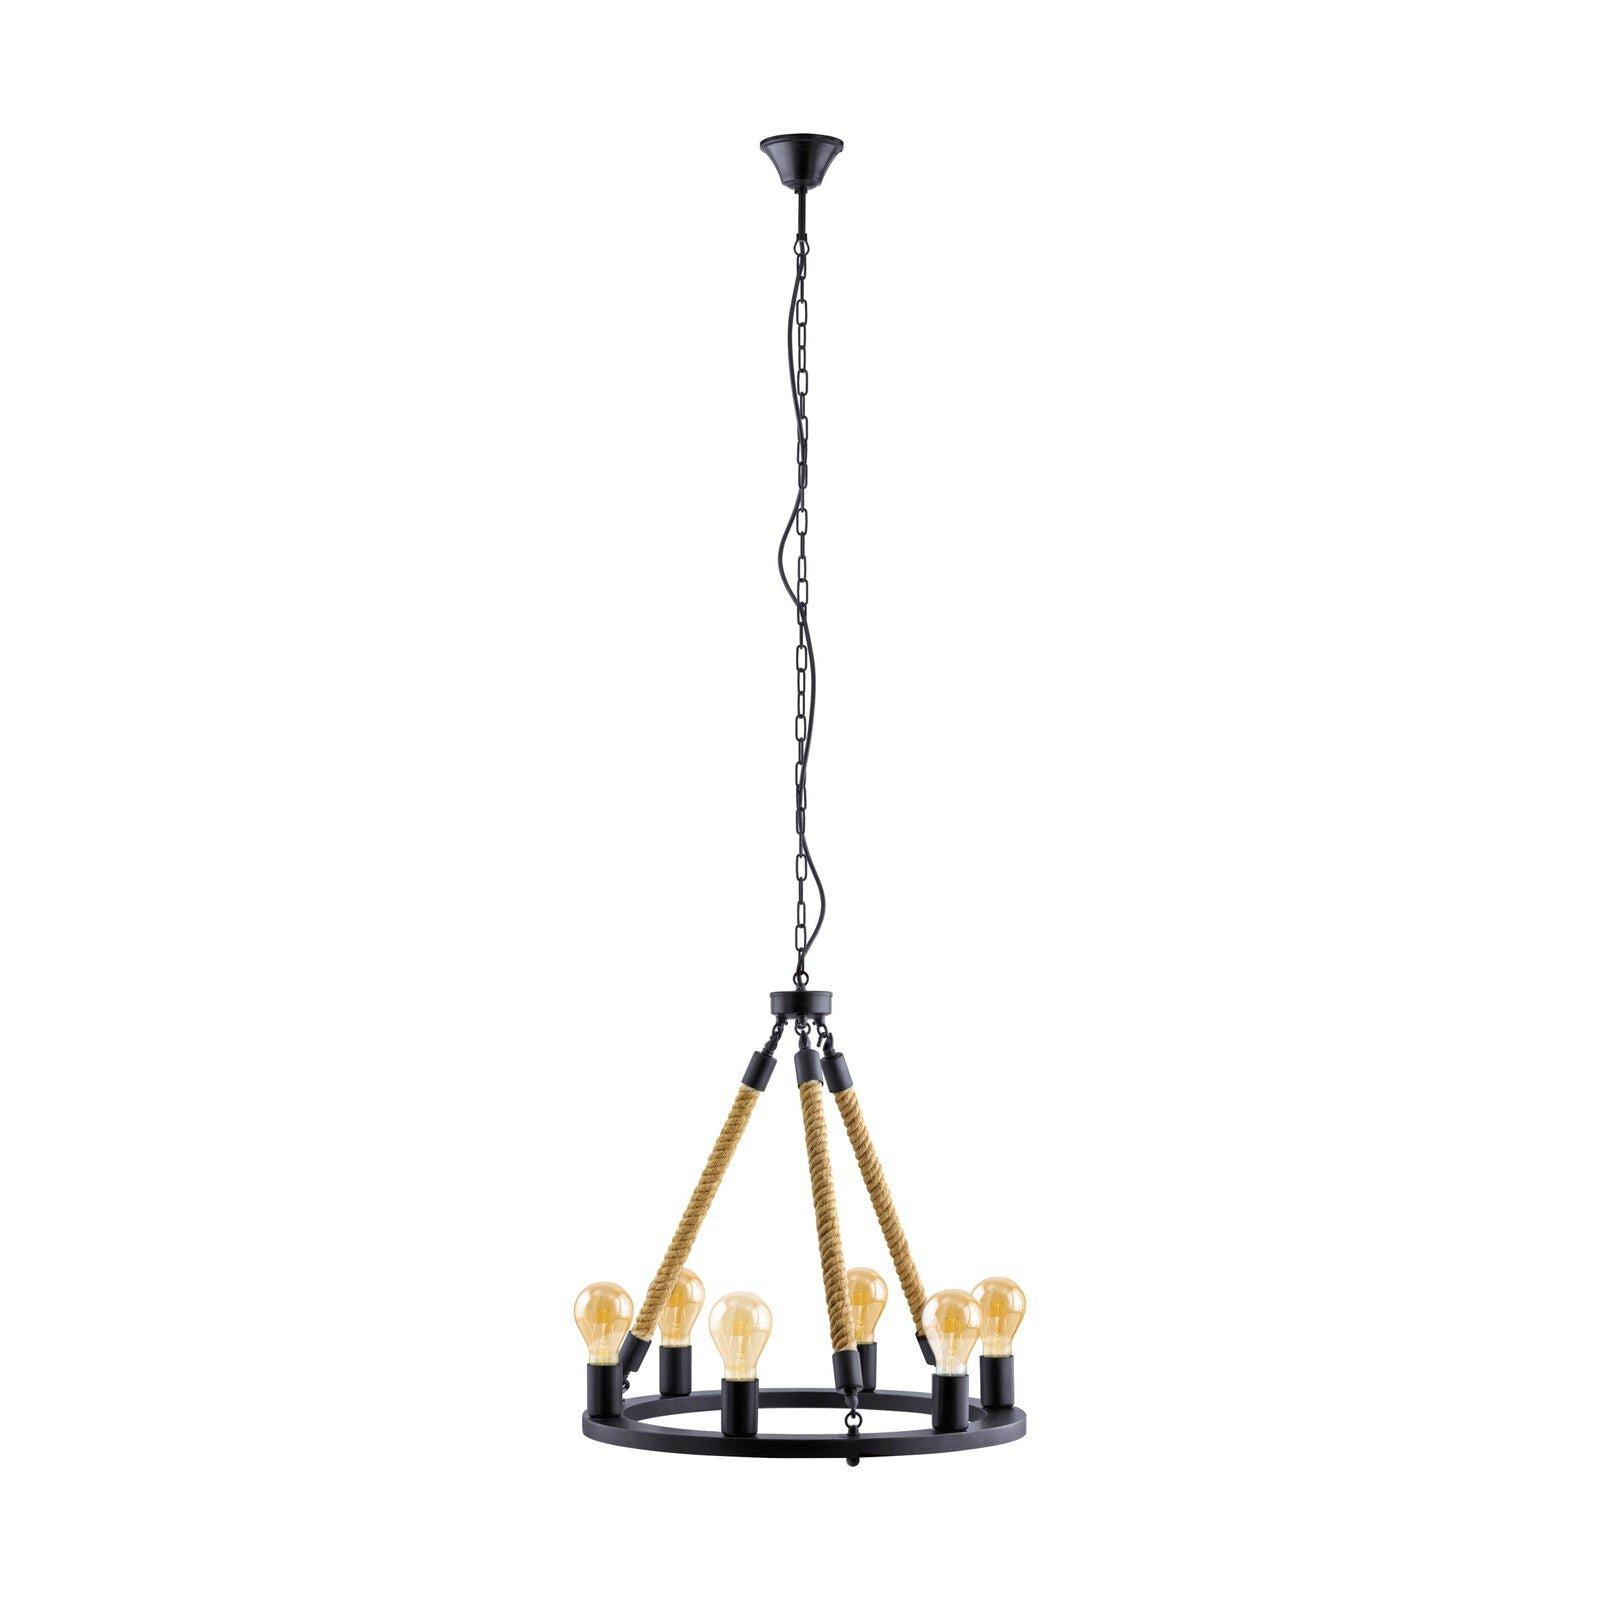 Hanging Ceiling Pendant Light Black & Rope 6x 60W E27 Round Feature Chandelier